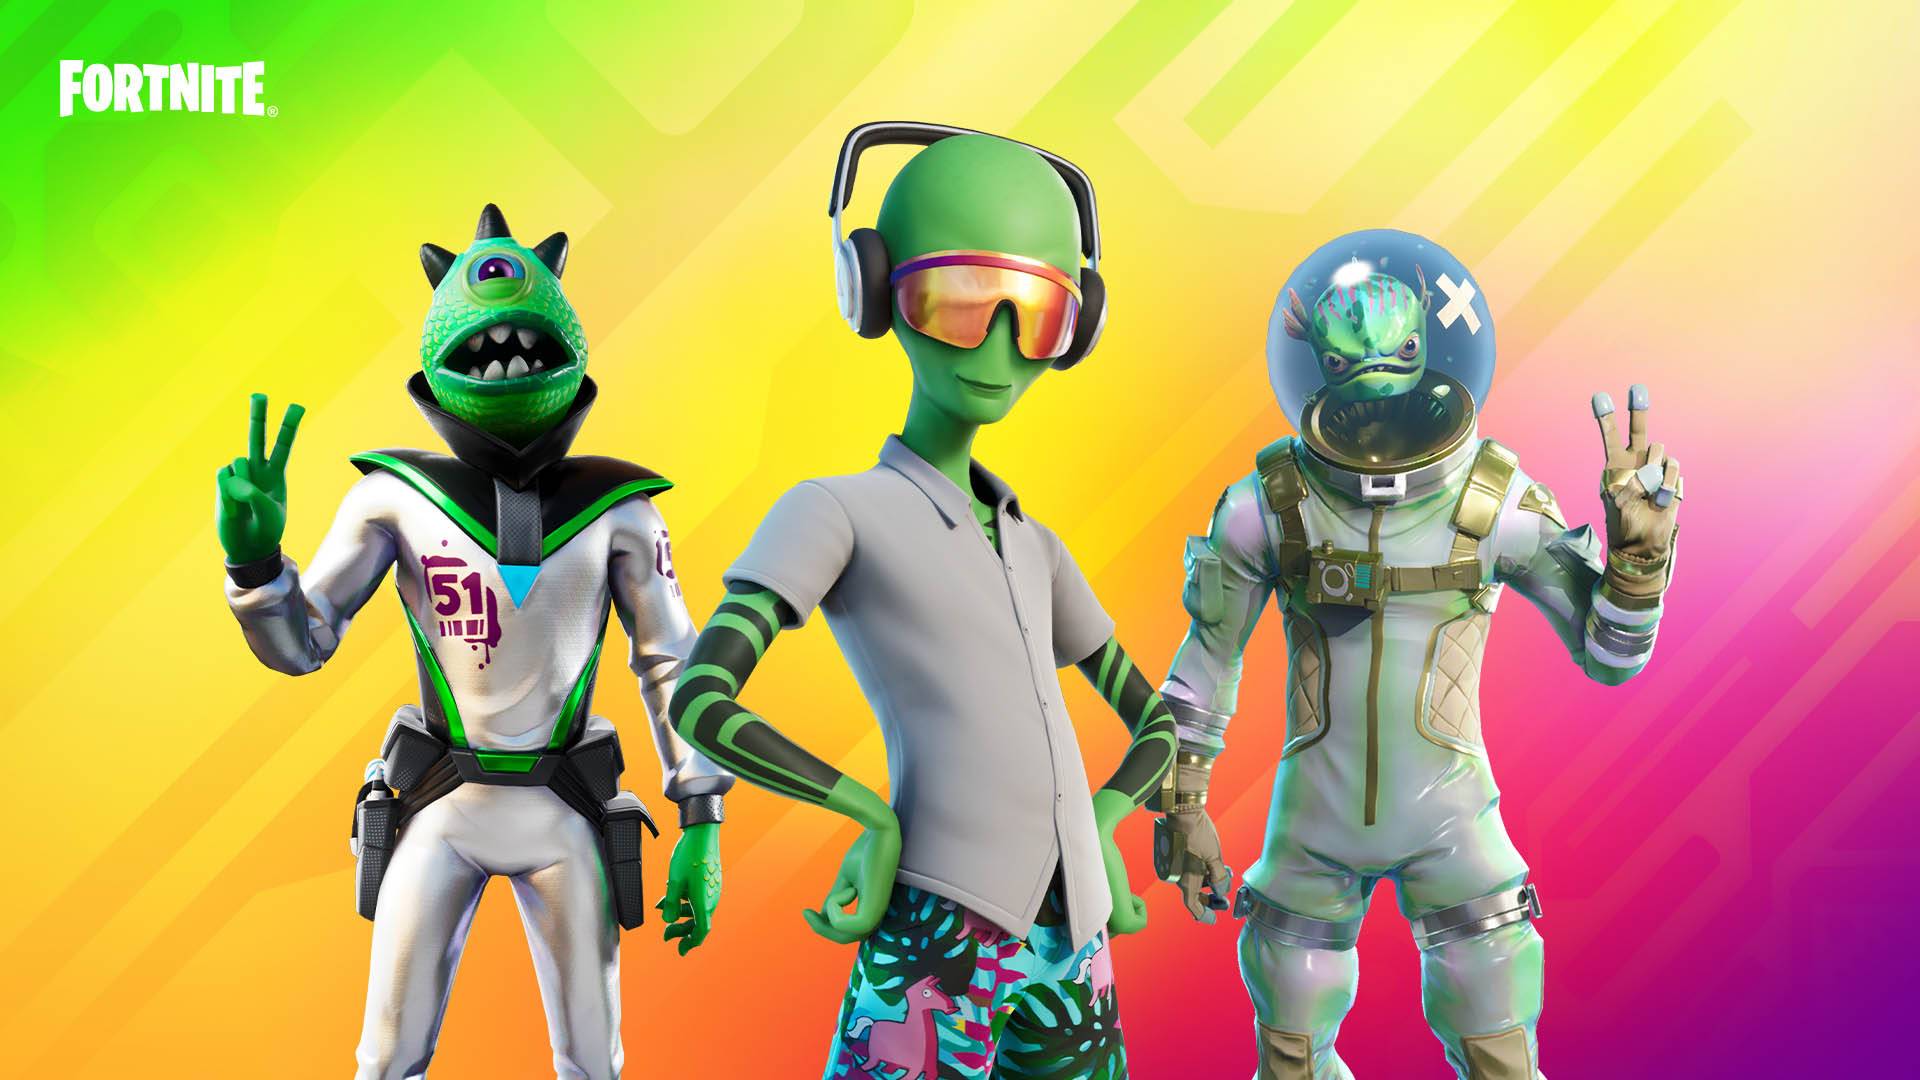 Fortnite monsters characters